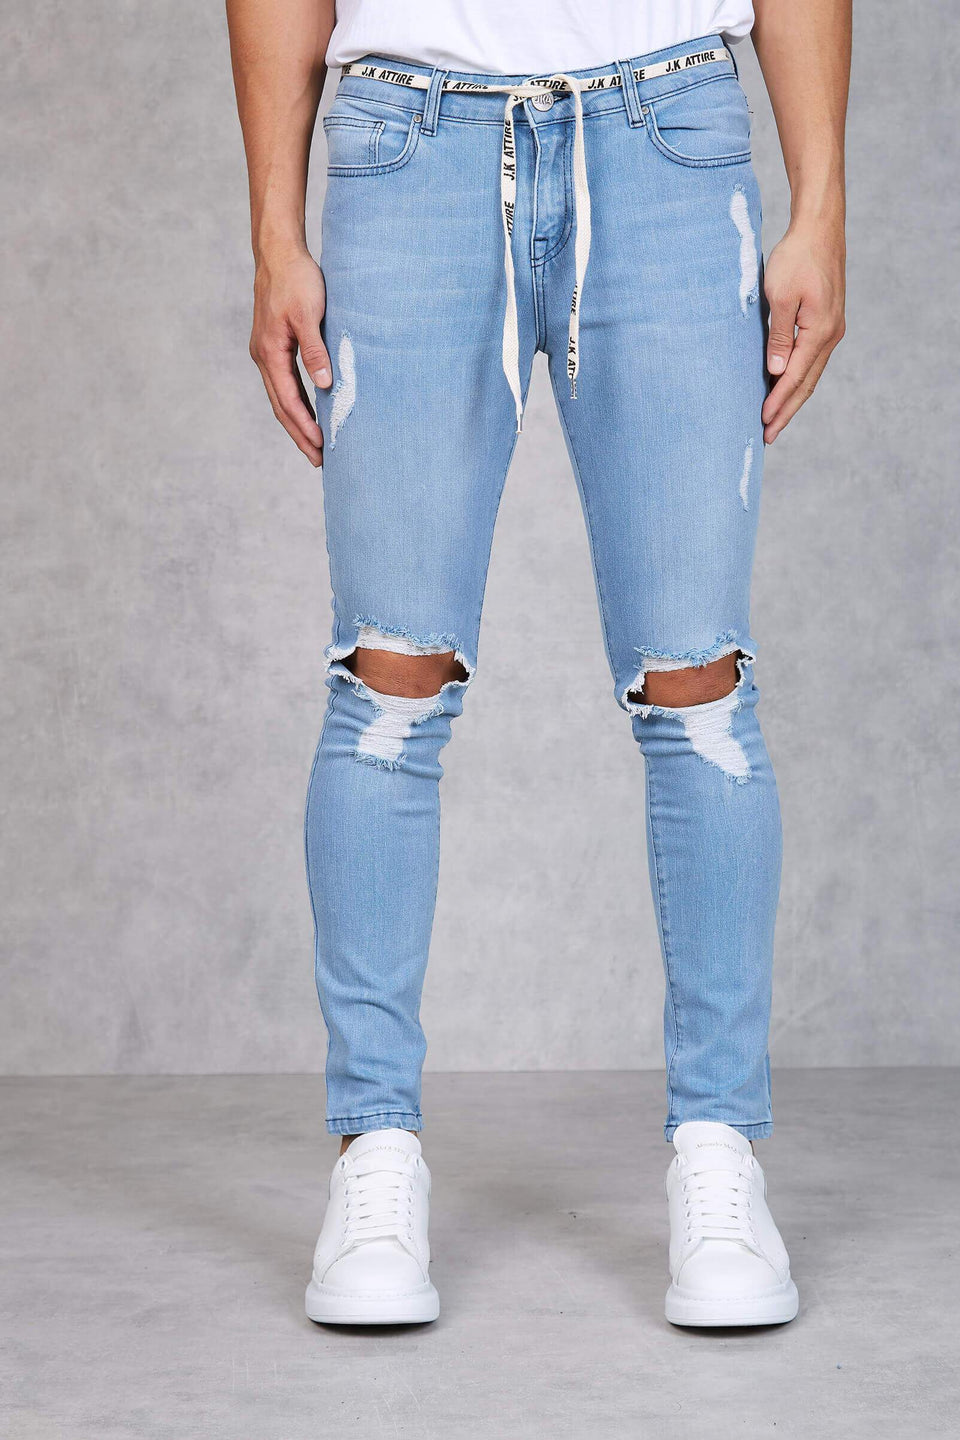 F2 - Caraway Dirty Wash Distressed Skinny Jeans - Light Blue